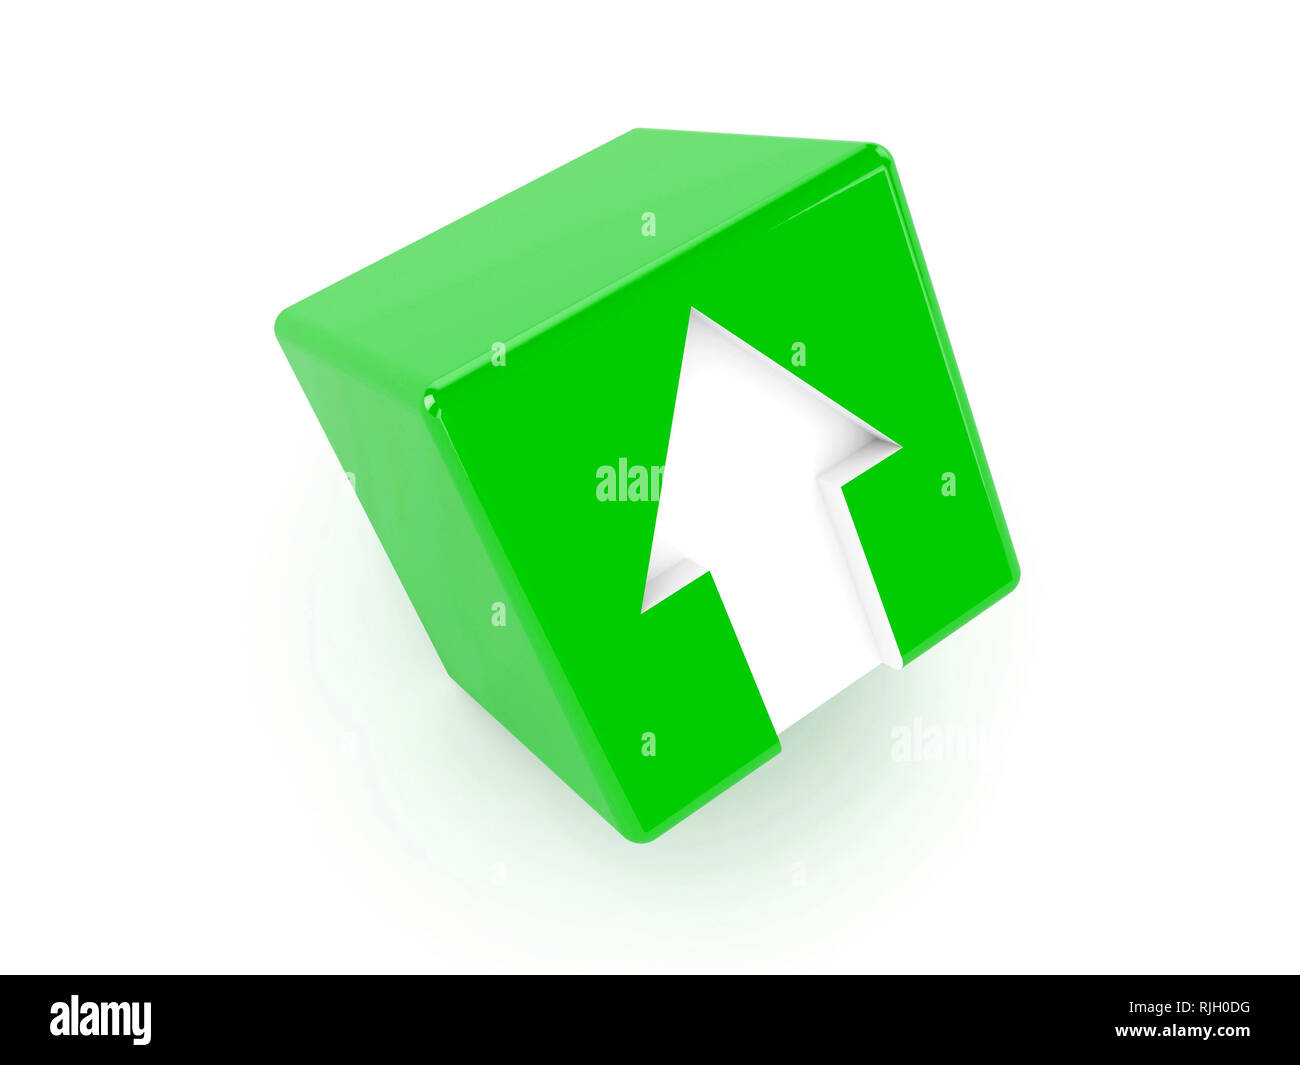 3D green cube with an arrow pointing up. Concept illustration Stock Photo